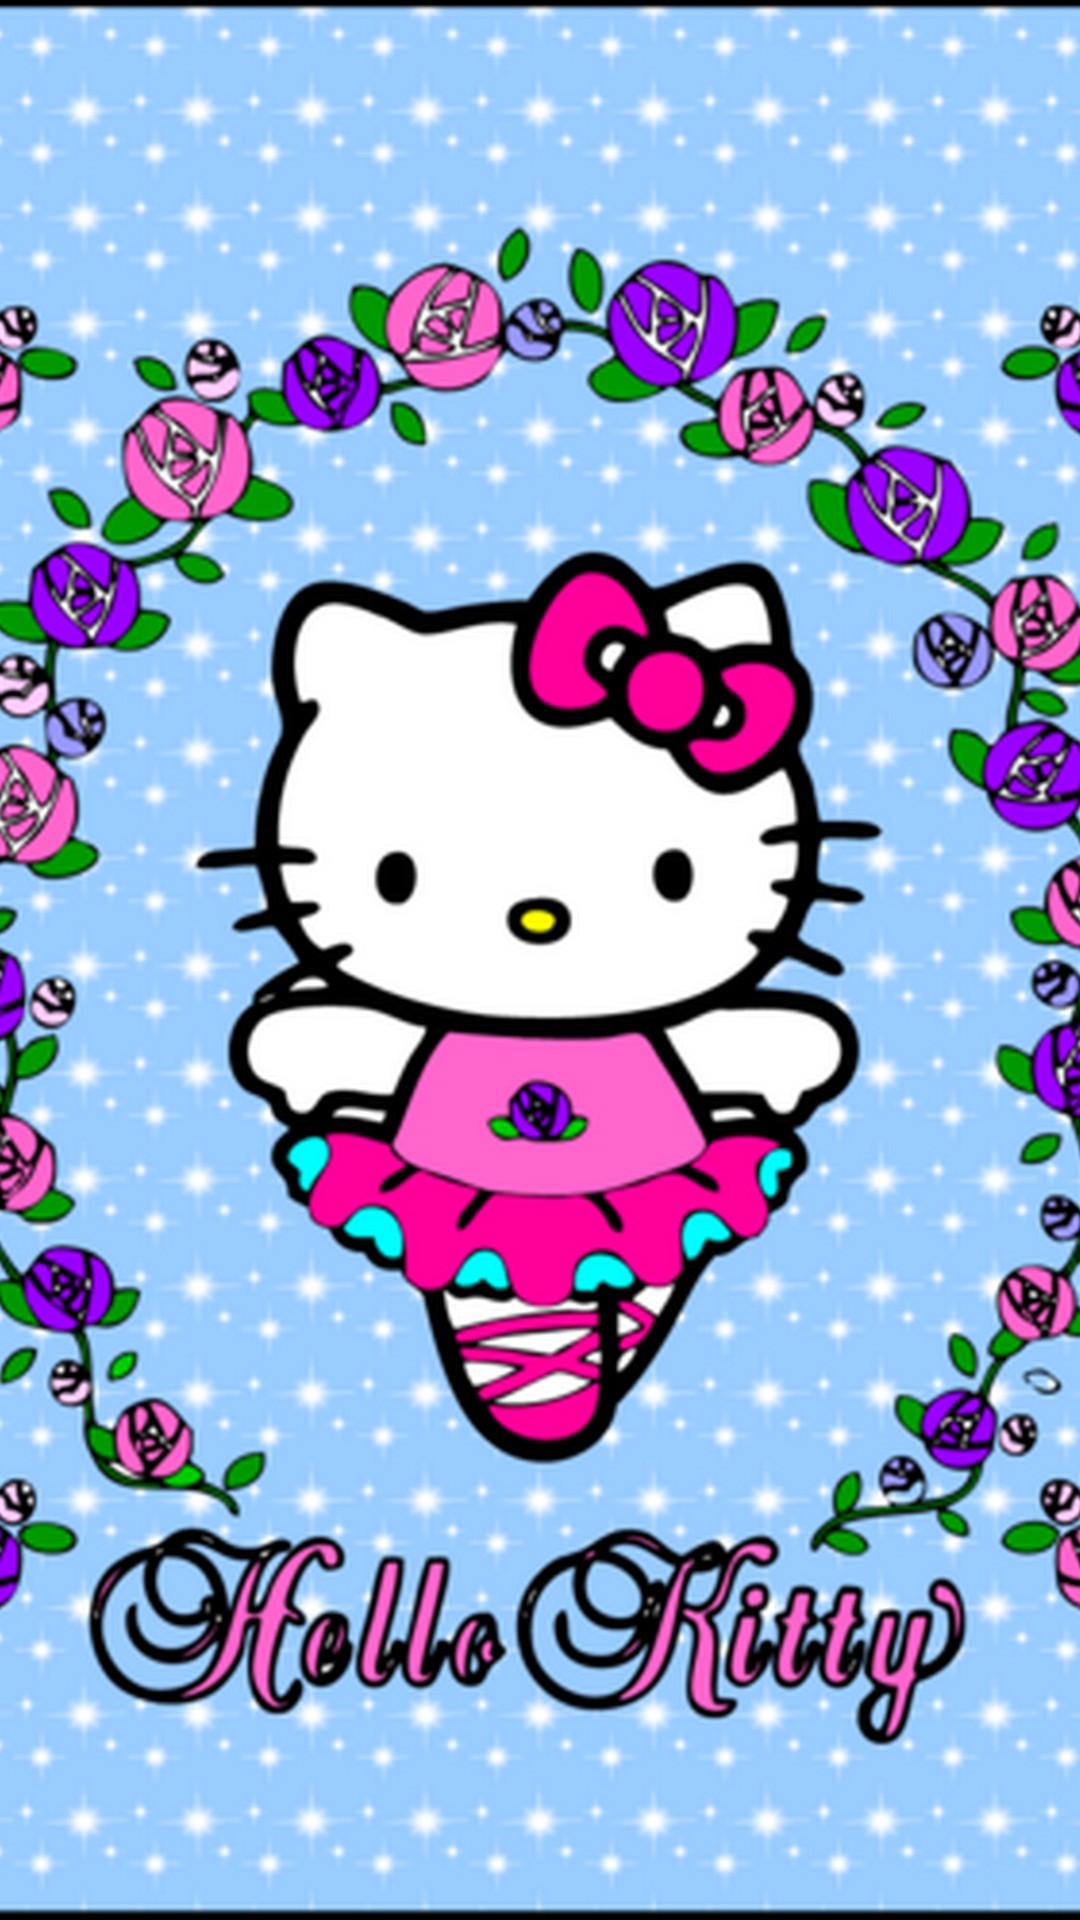 Wallpaper Sanrio Hello Kitty Android with resolution 1080X1920 pixel. You can make this wallpaper for your Android backgrounds, Tablet, Smartphones Screensavers and Mobile Phone Lock Screen